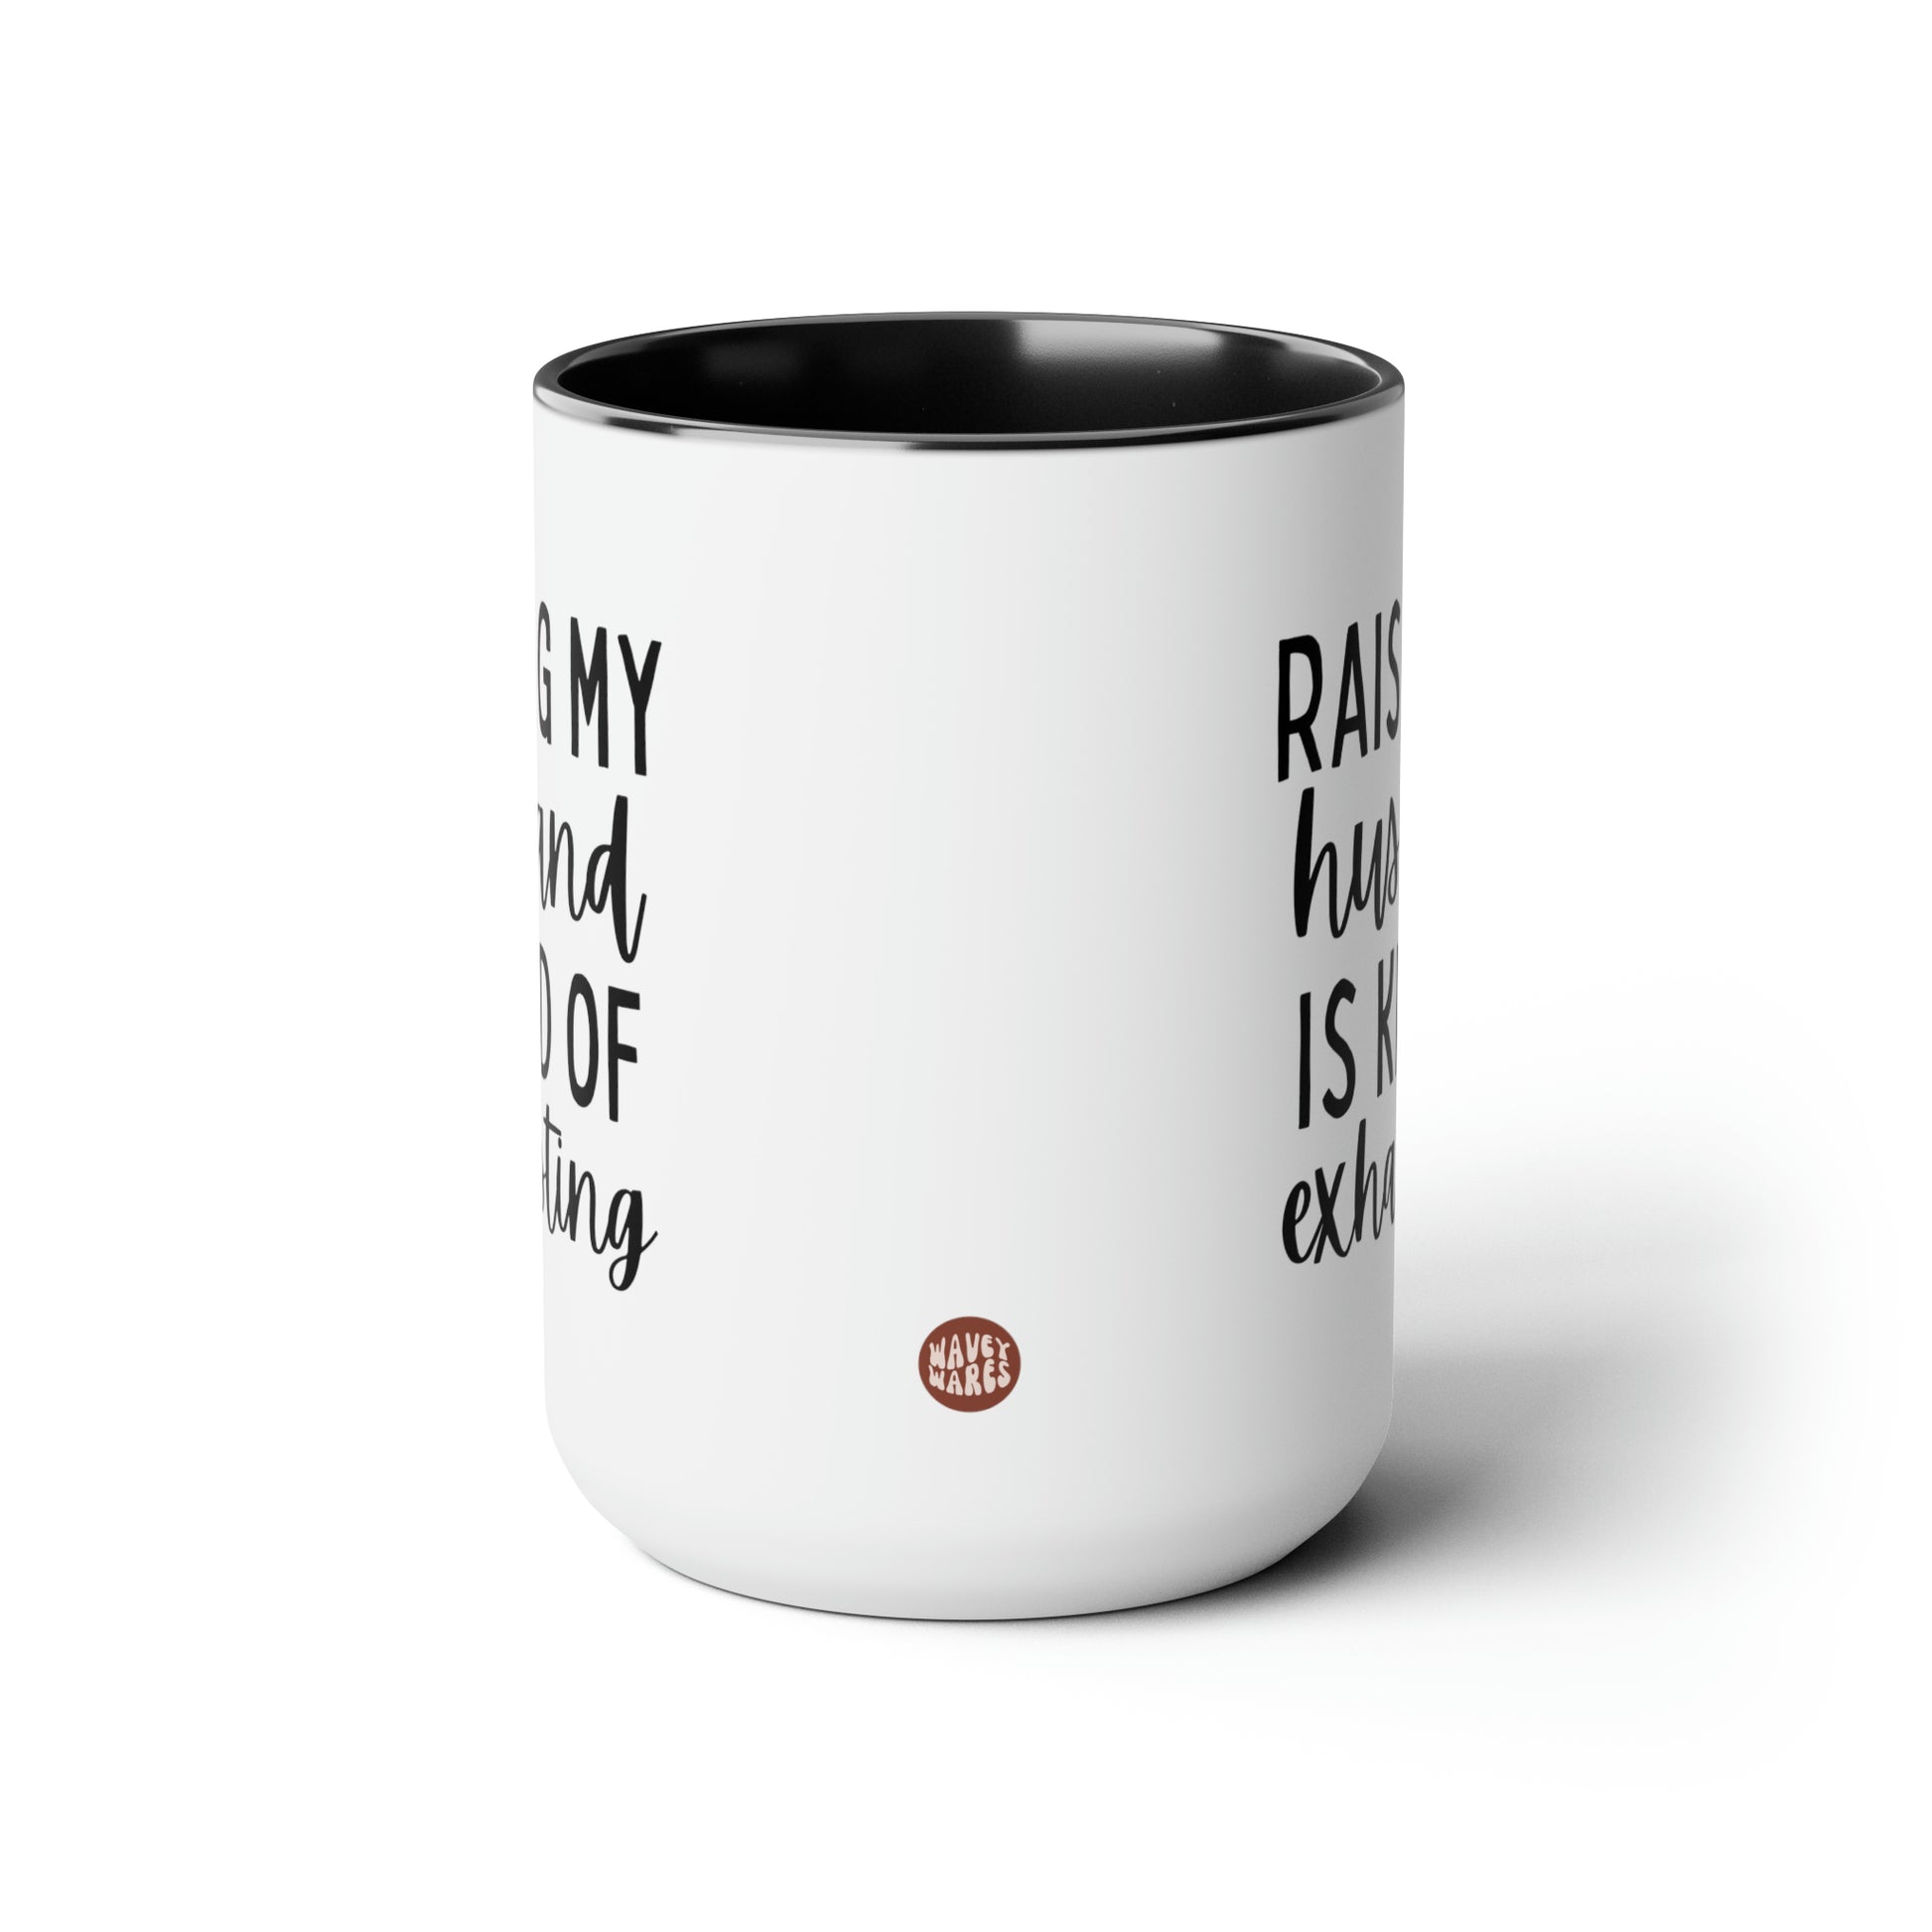 Raising My Husband is Kind of Exhausting 15oz white with black accent funny large coffee mug gift for wife mom bestie best friend sarcastic quote waveywares wavey wares wavywares wavy wares side